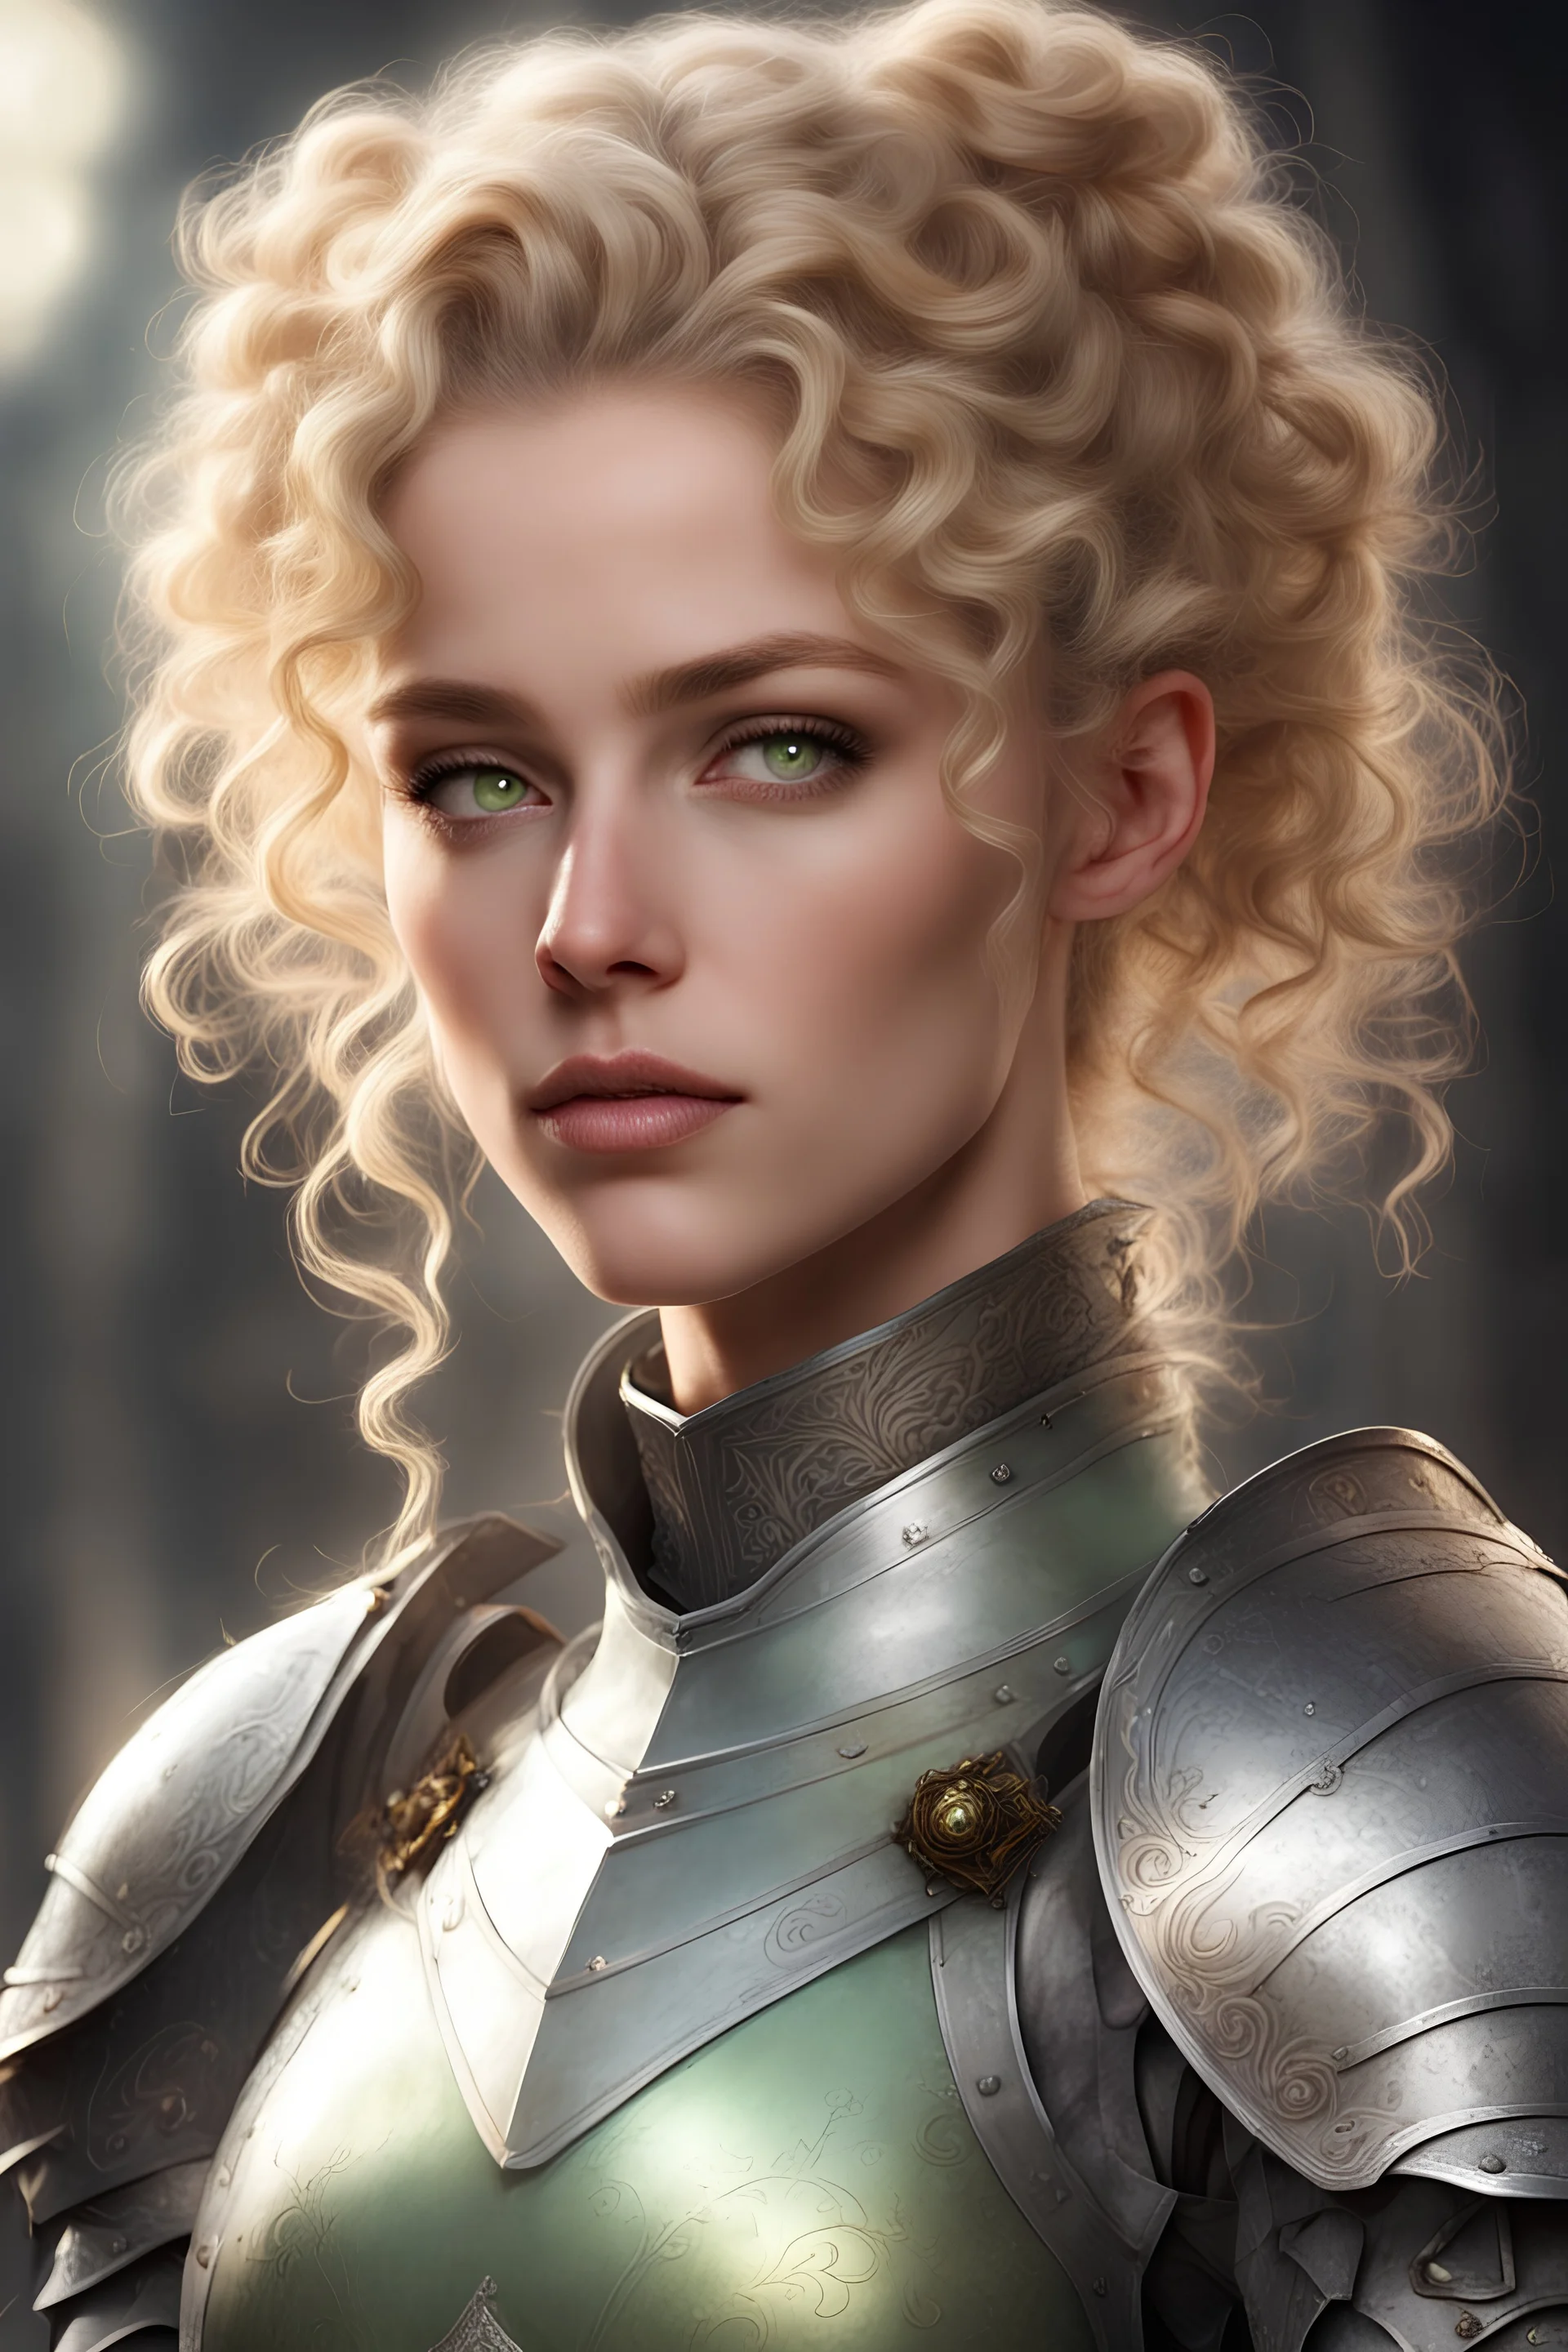 beautiful young lady with pale green eyes, her curly blonde hair is tied into a bun, her skin is luminous and her features delicate, she is wearing knight's armor, her expression is resolute